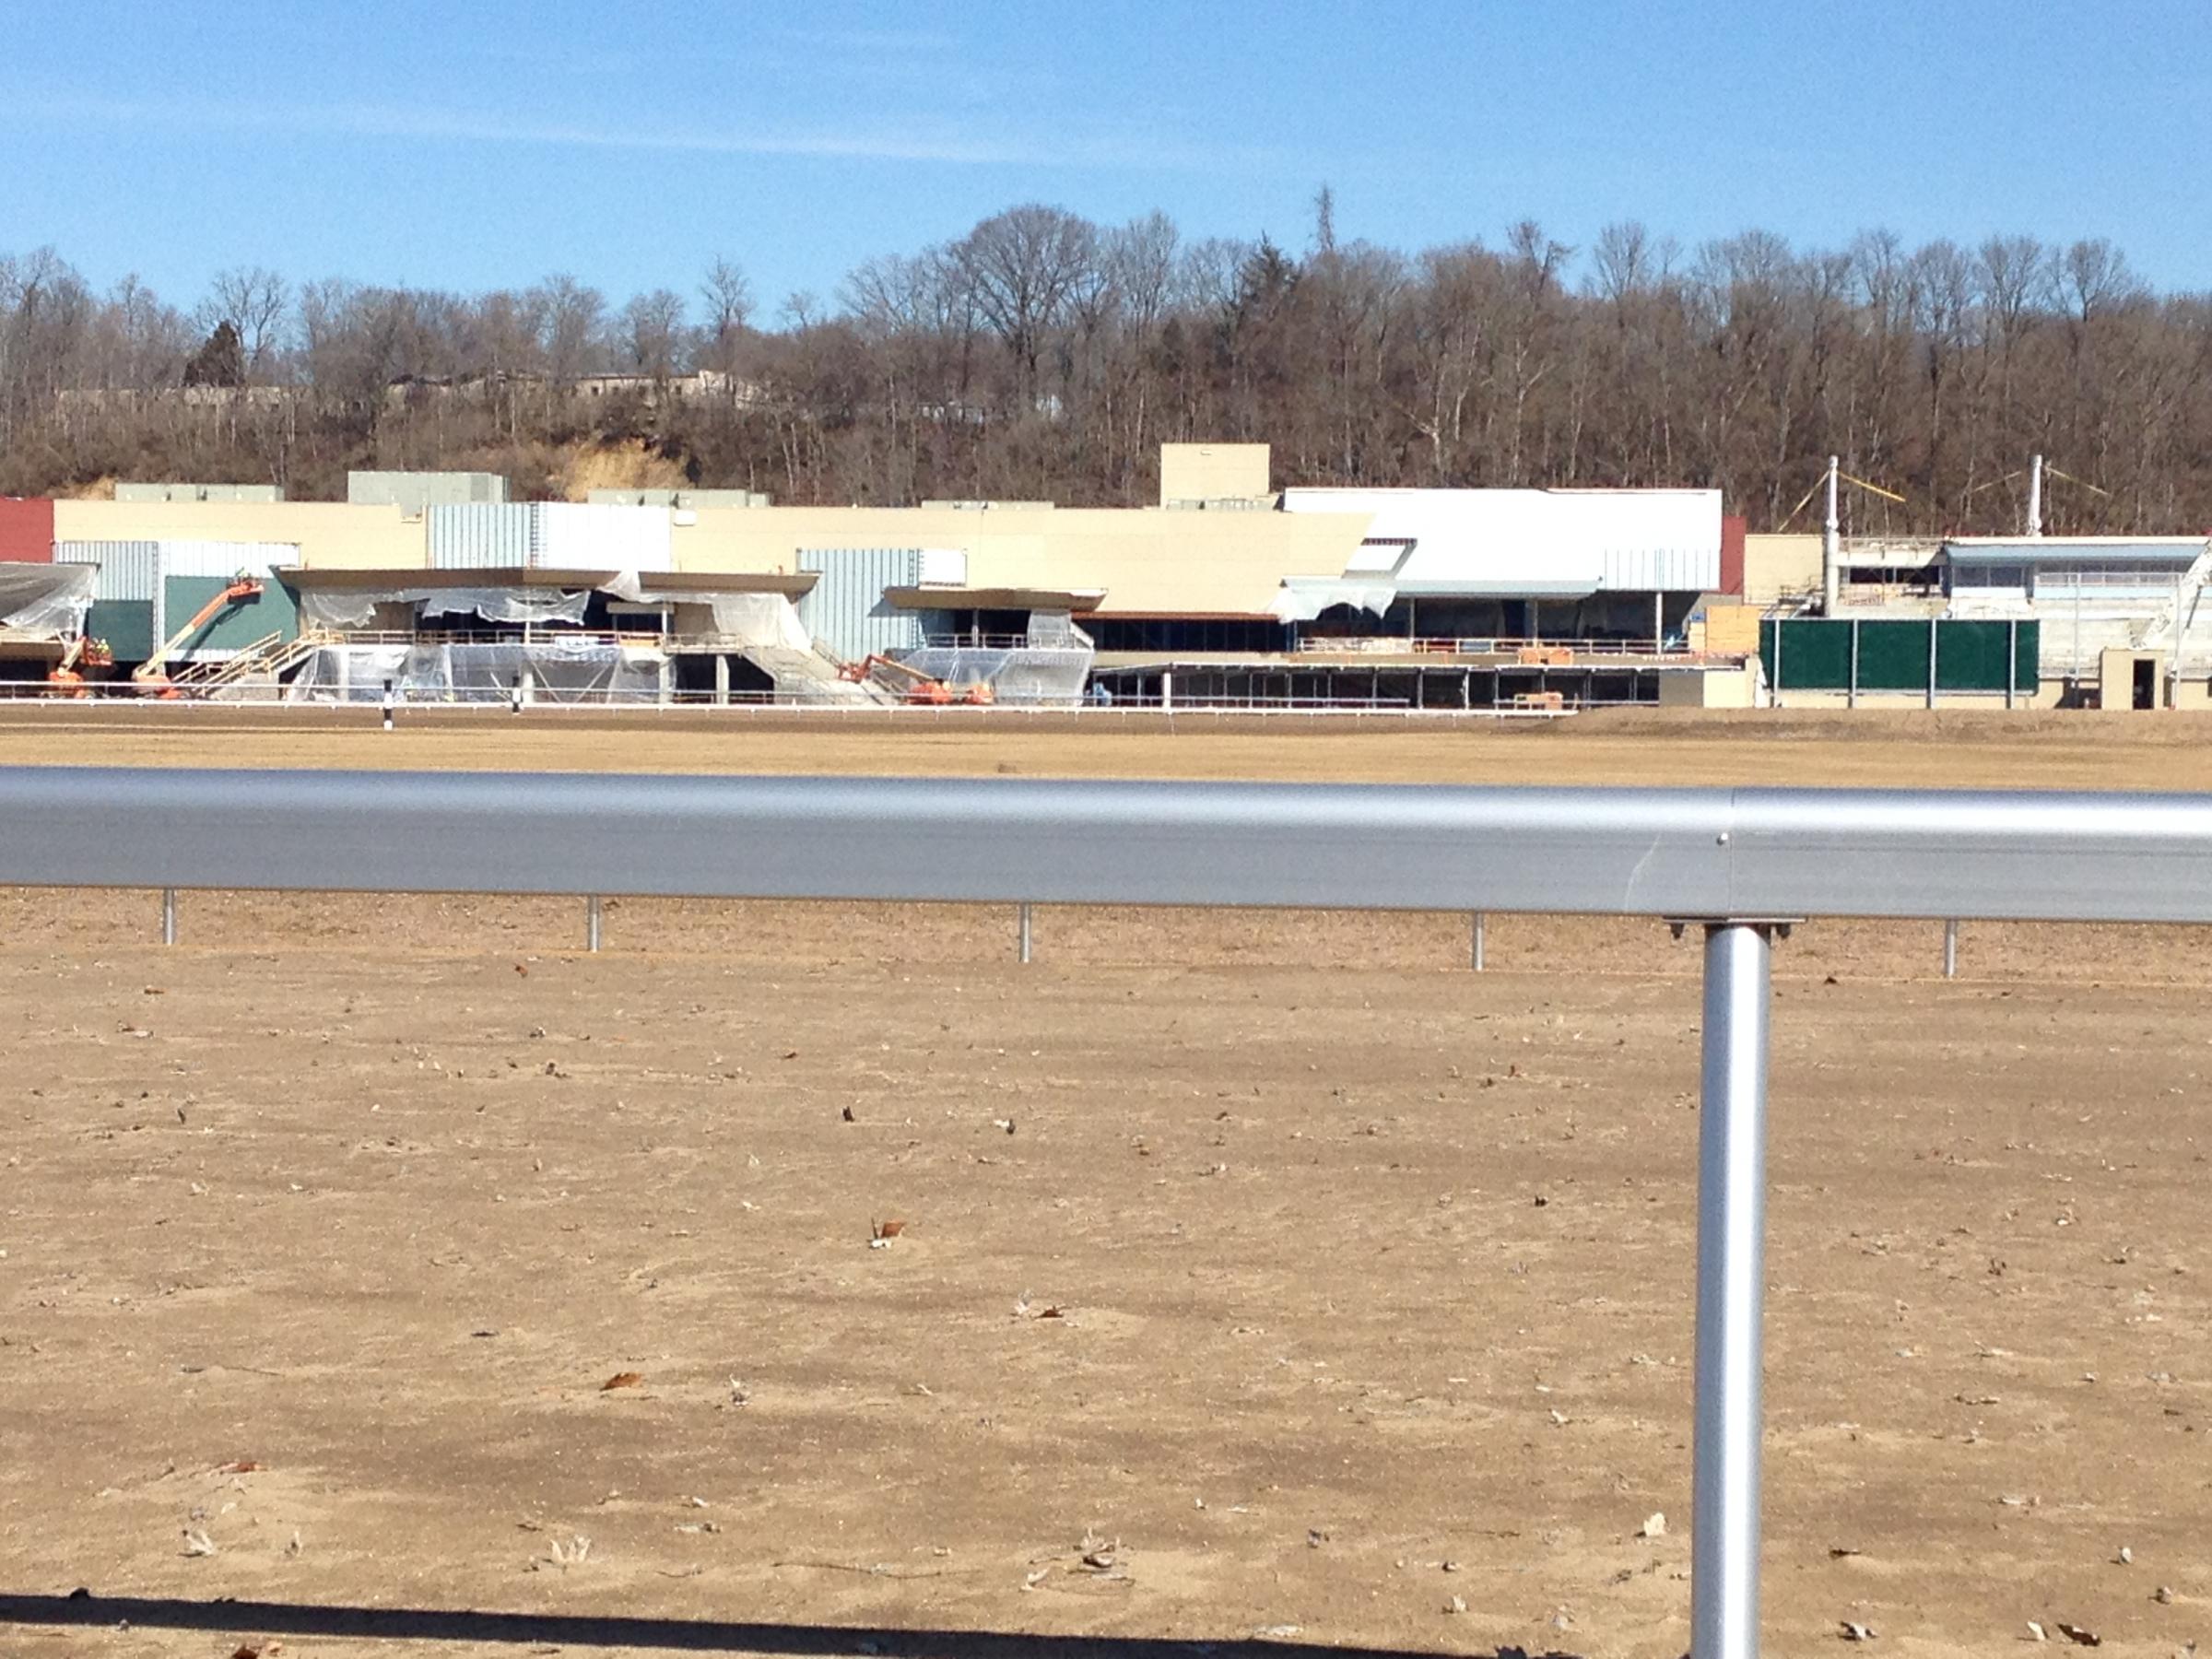 Belterra Park (River Downs) set to open this spring | WVXU